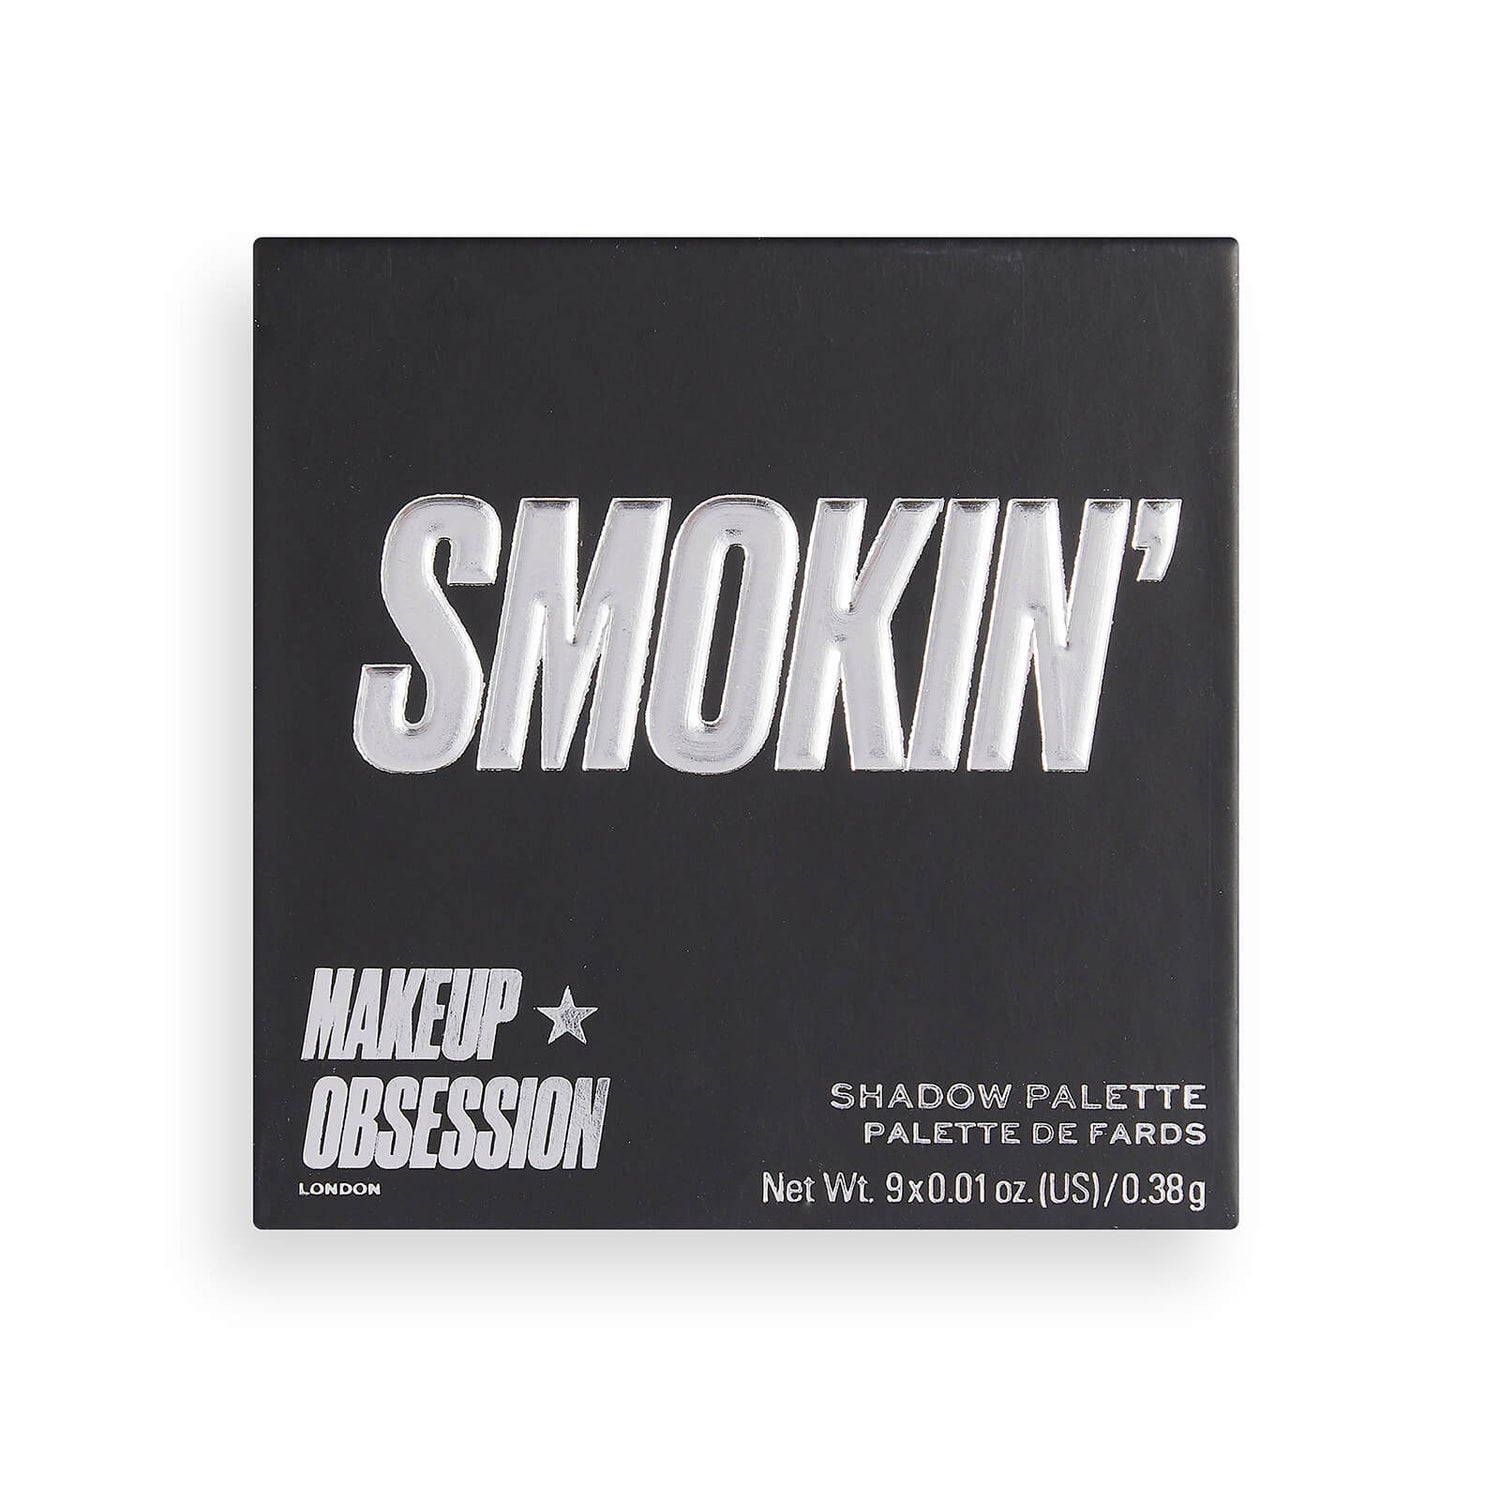 Makeup Obsession Smokin' Shadow Palette